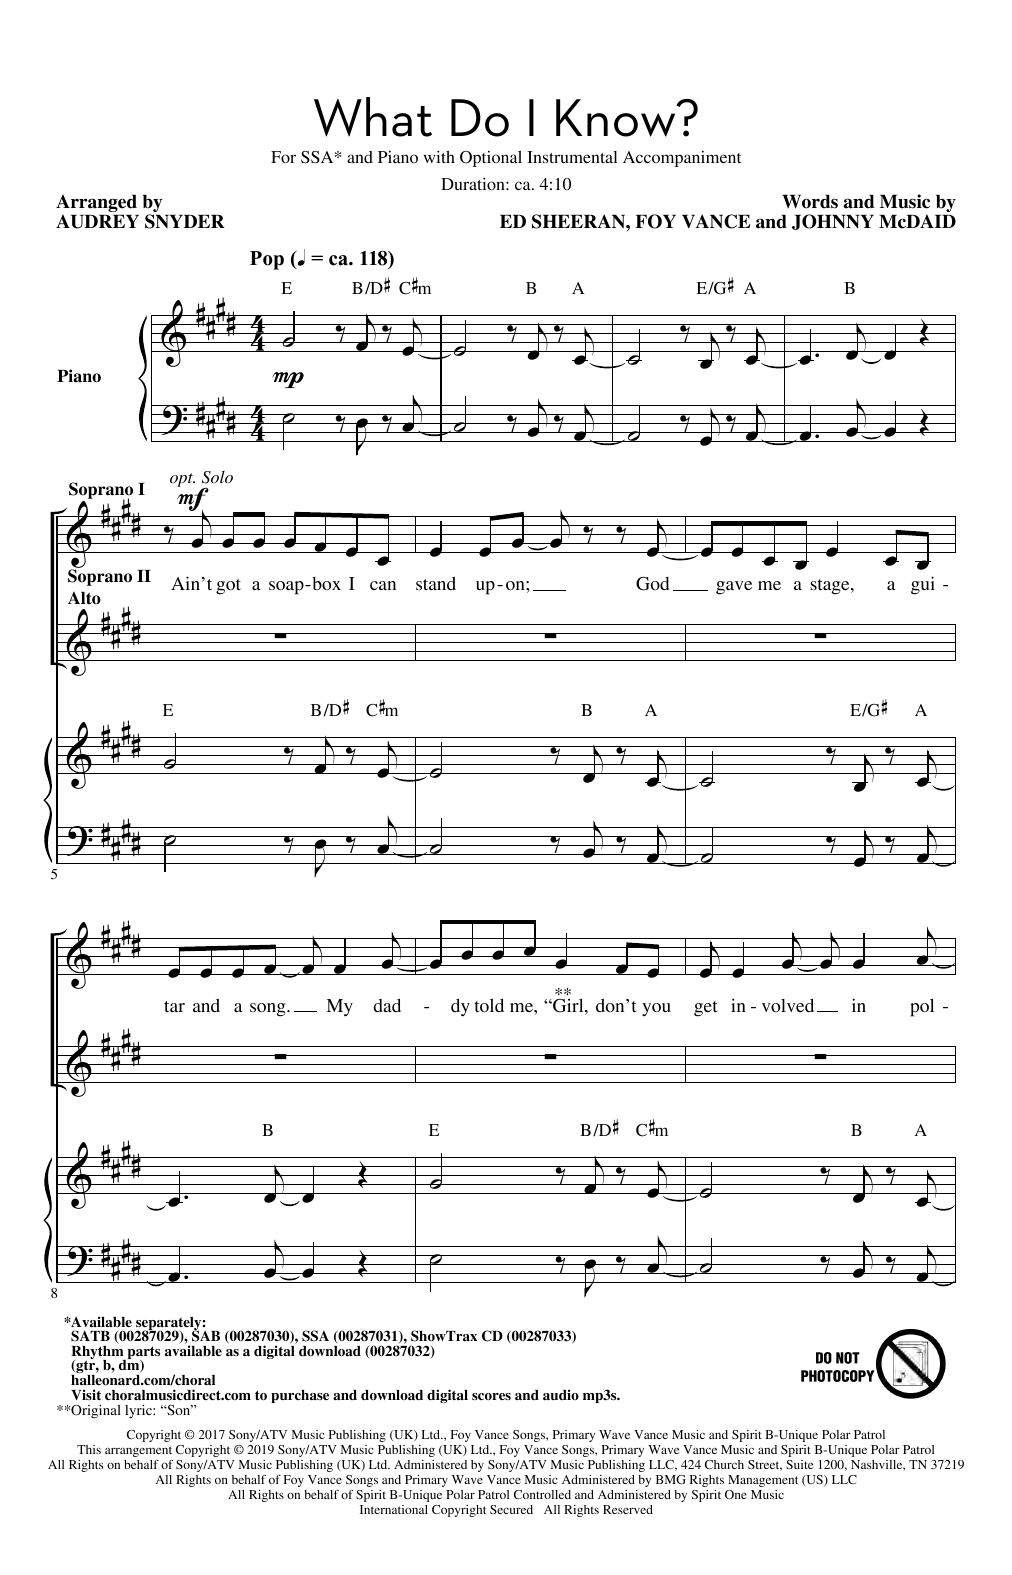 Download Ed Sheeran What Do I Know? (arr. Audrey Snyder) Sheet Music